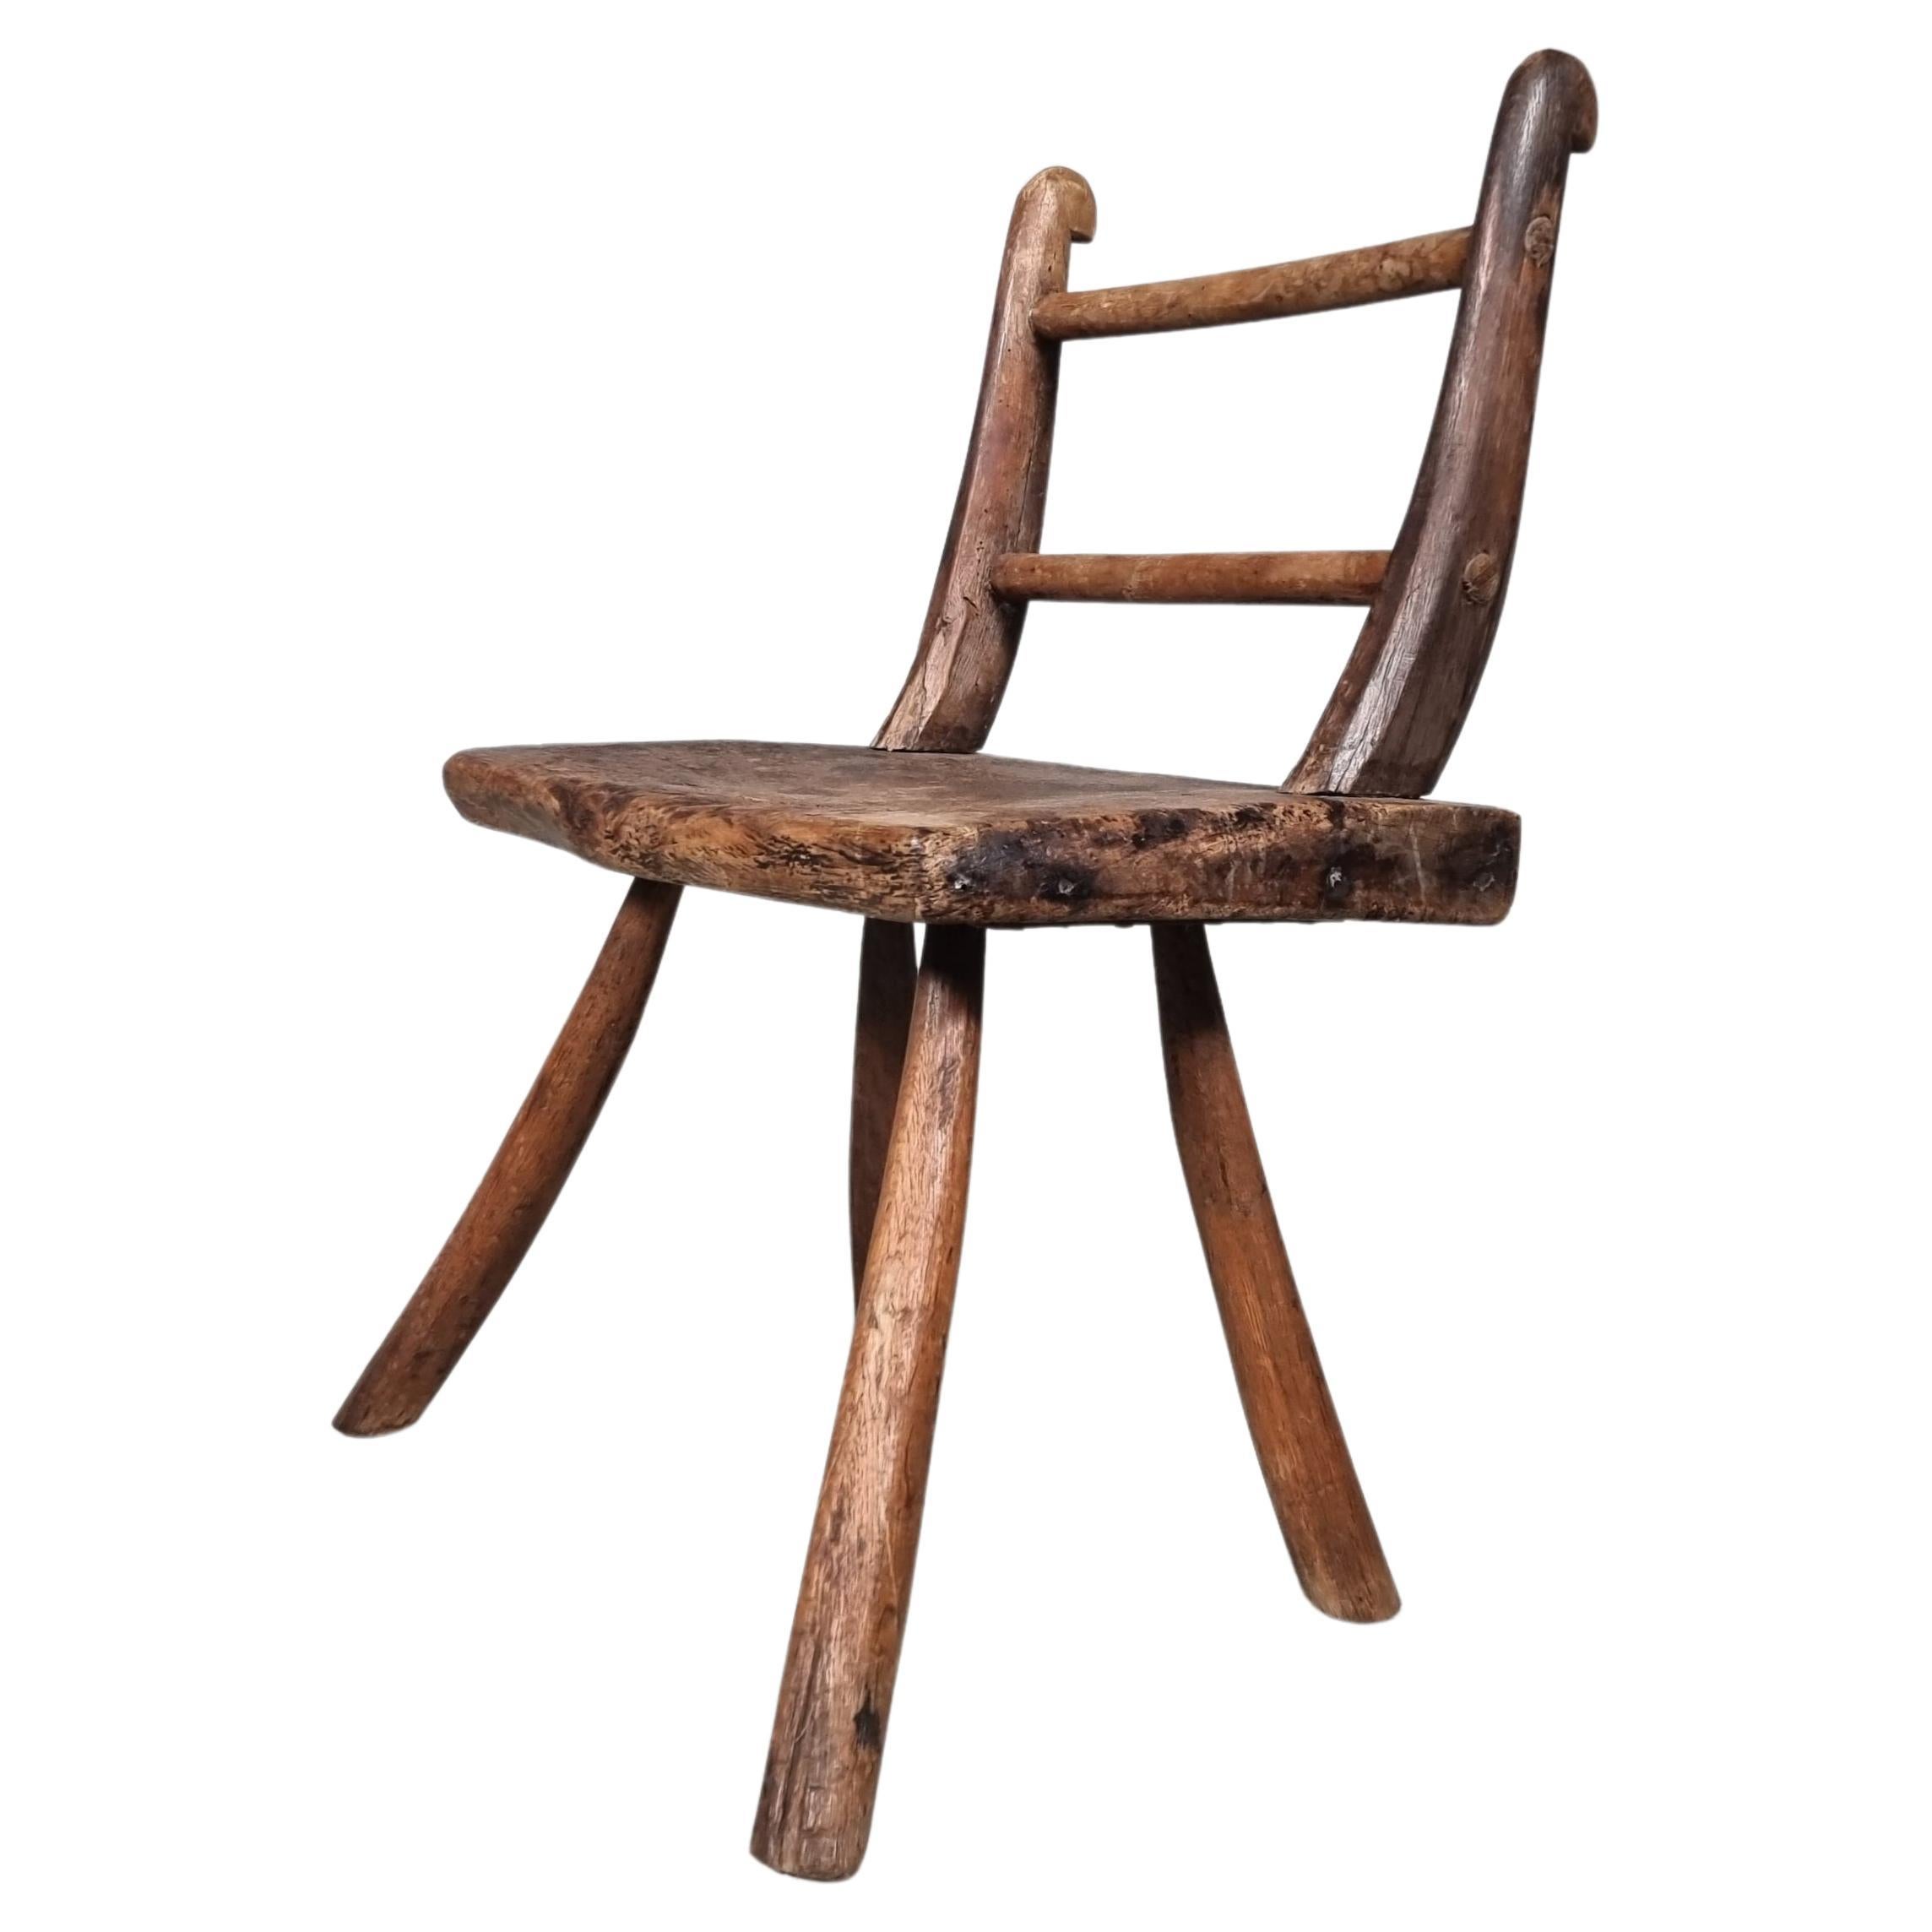 Rustic Wabi-Sabi Style Side Chair Constructed of Curved Dark Hardwood, 1900s For Sale